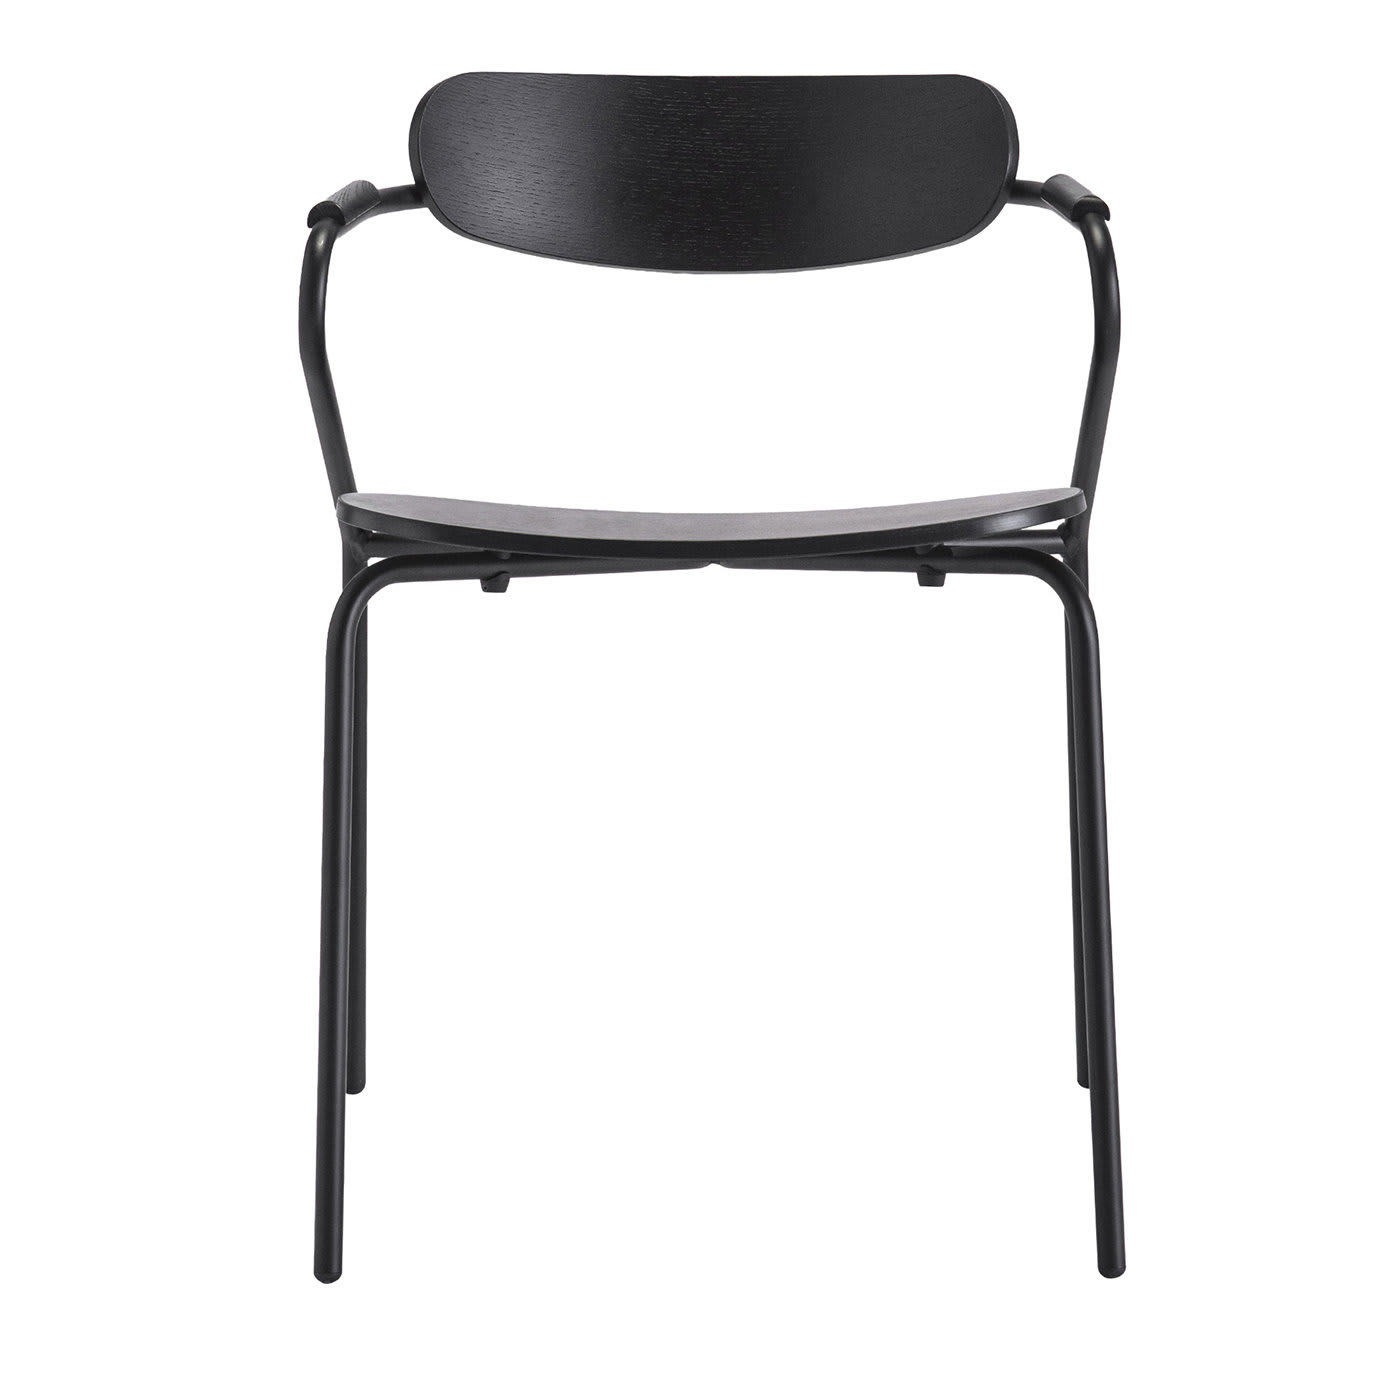 Linea Black Chair with Armrests - Livoni